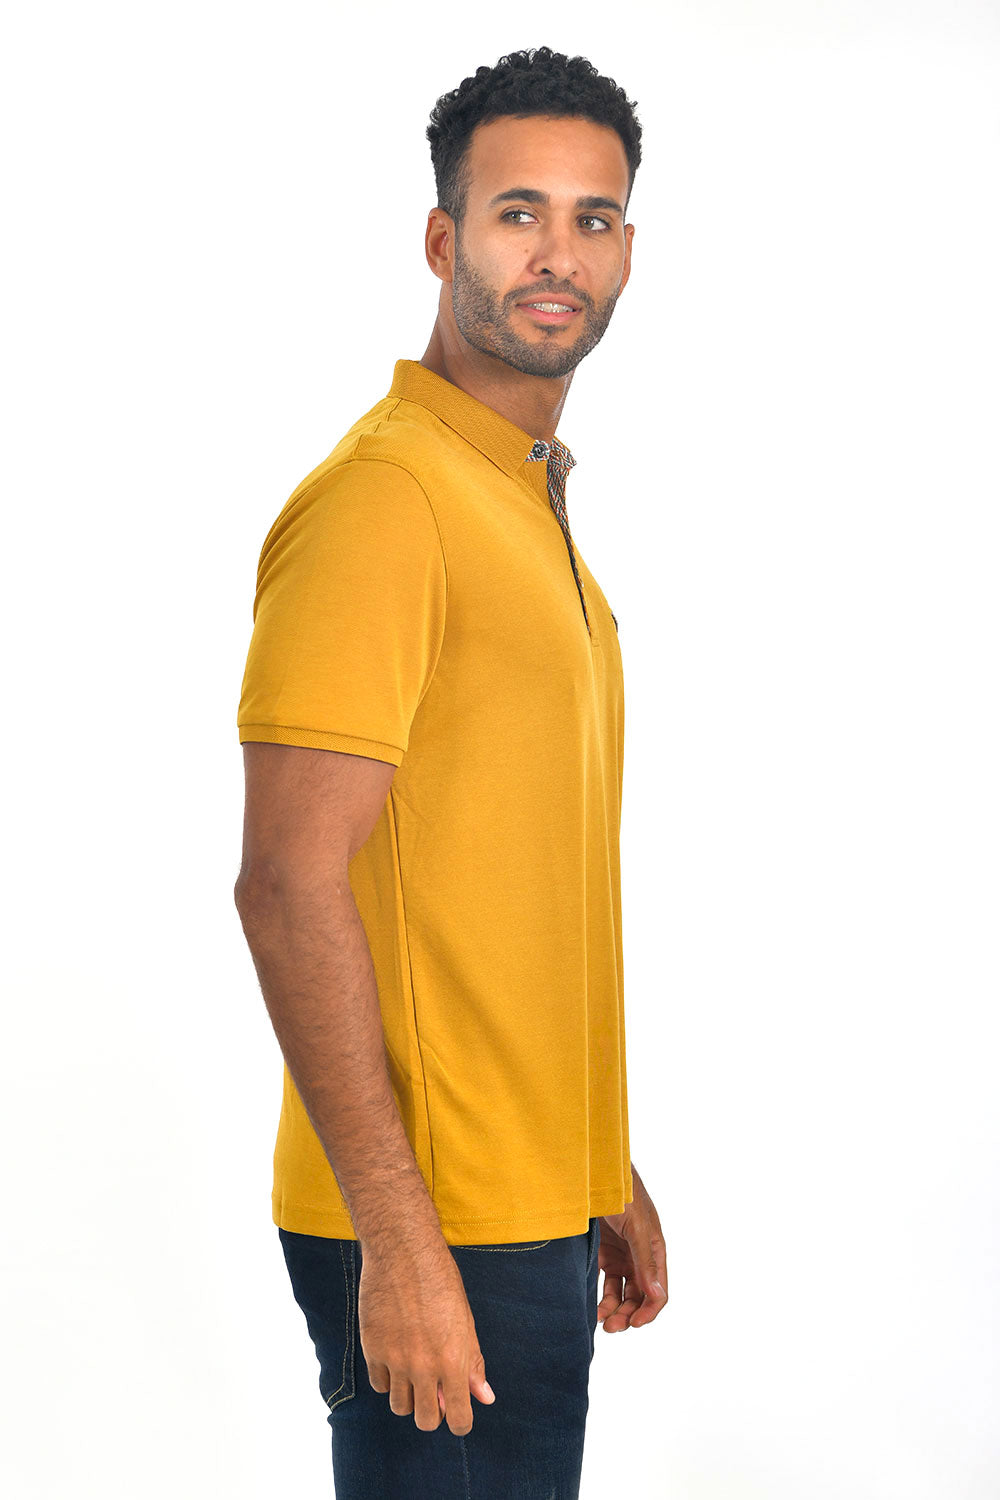 BARABAS Men's solid color Polo shirts with pocket Yellow colors PP817